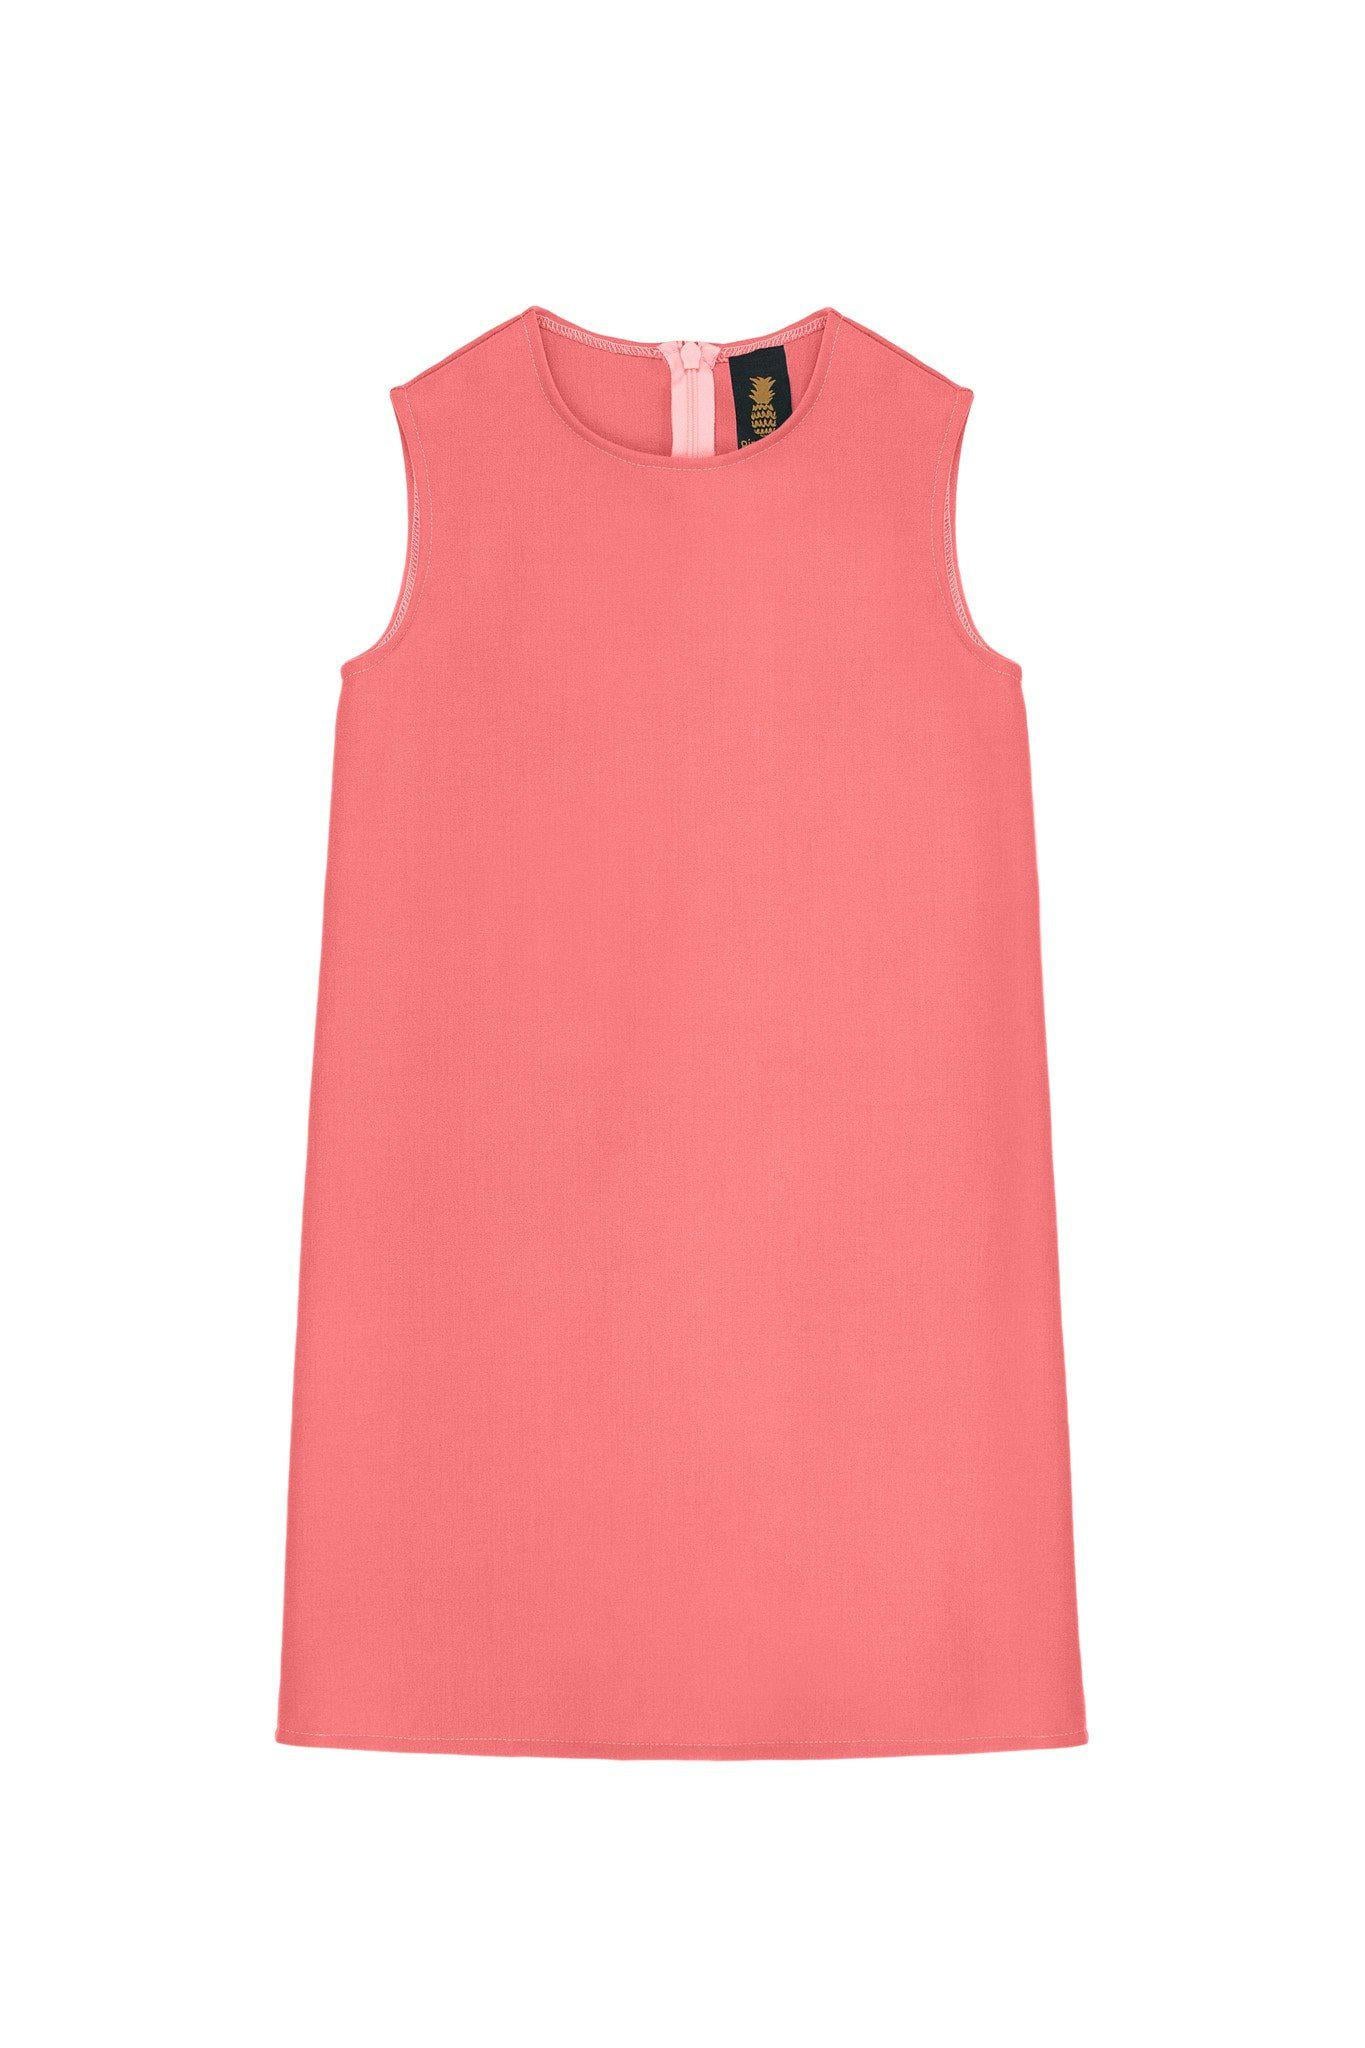 Coral Pink Stretchy Beautiful Summer Sleeveless Shift Dress - Girls - Pineapple Clothing